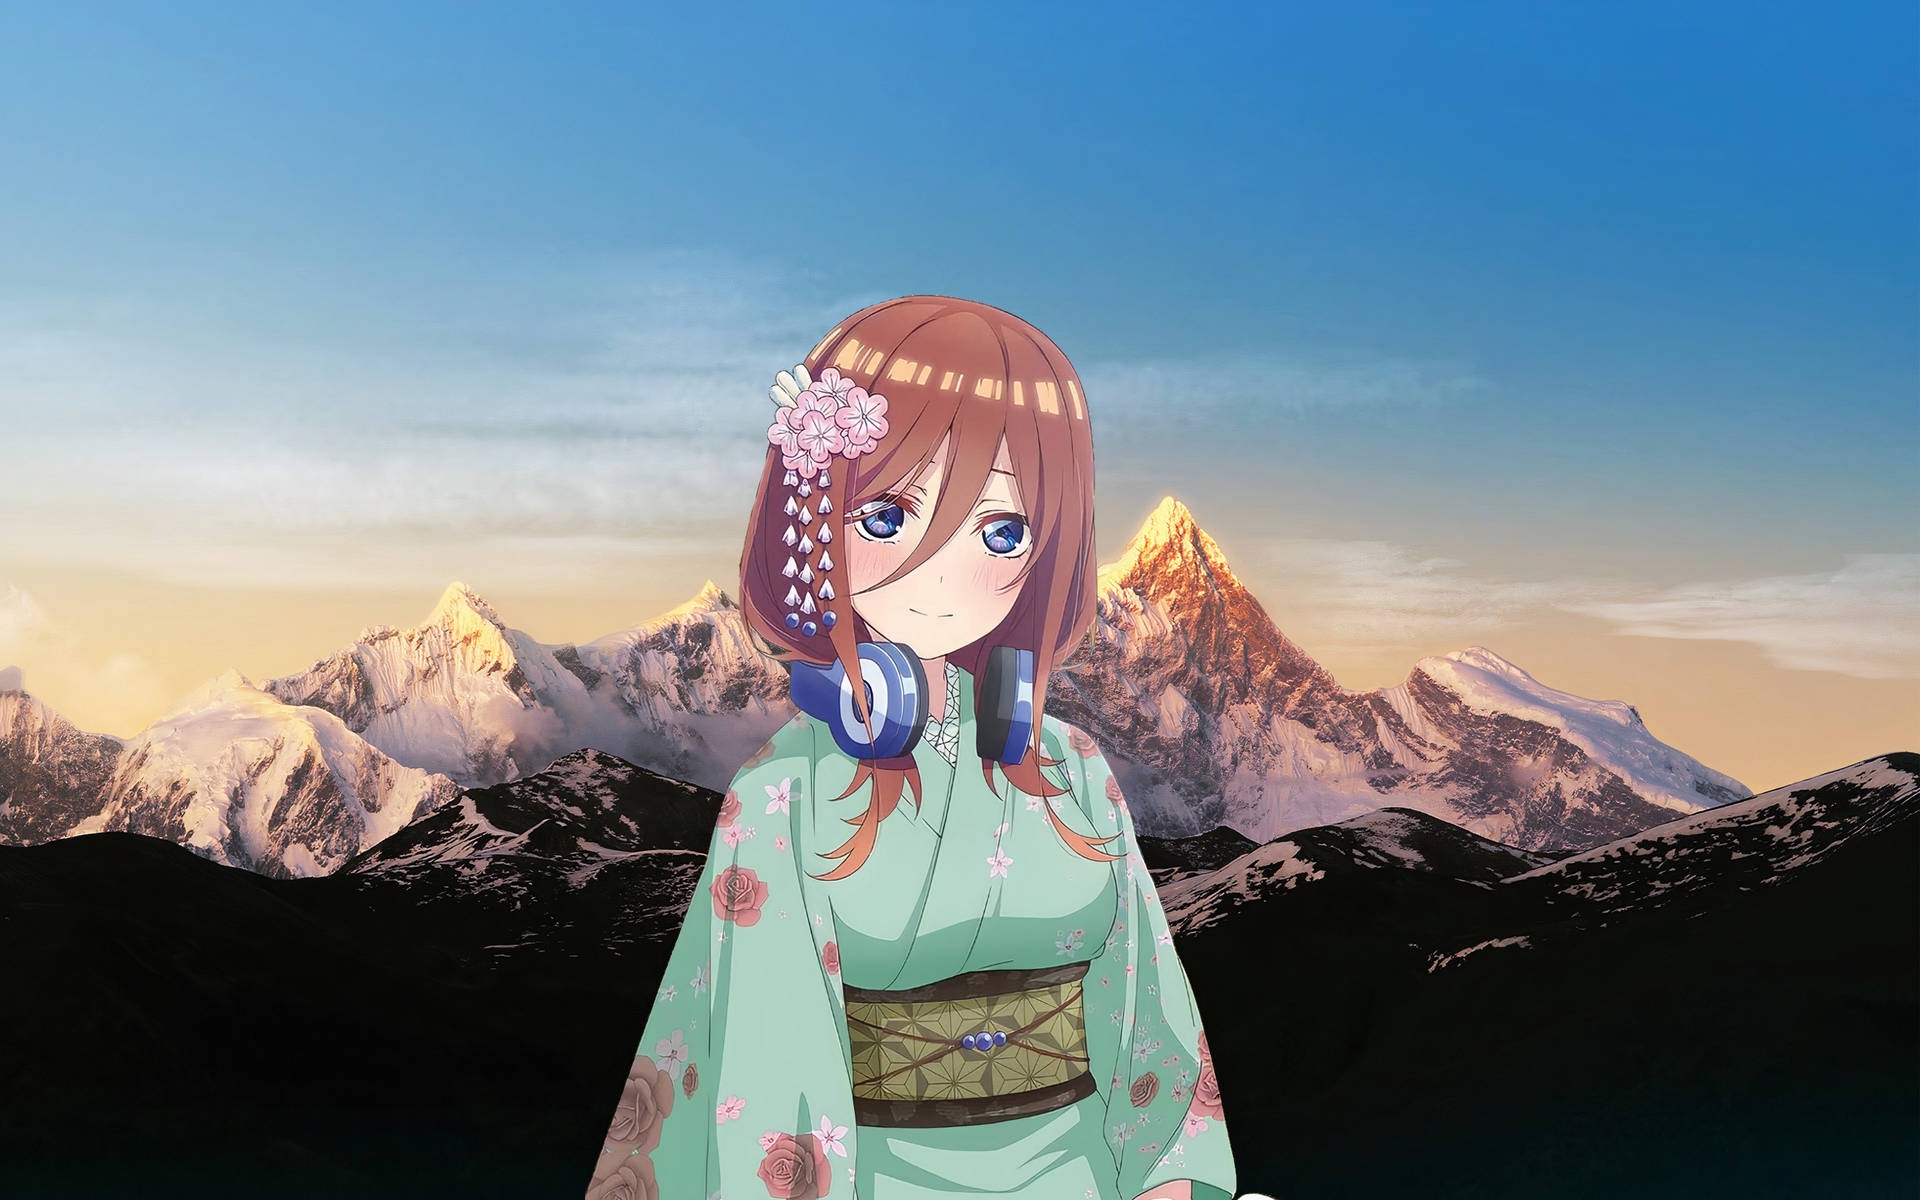 Miku Nakano Against A Snowy Mountain Background